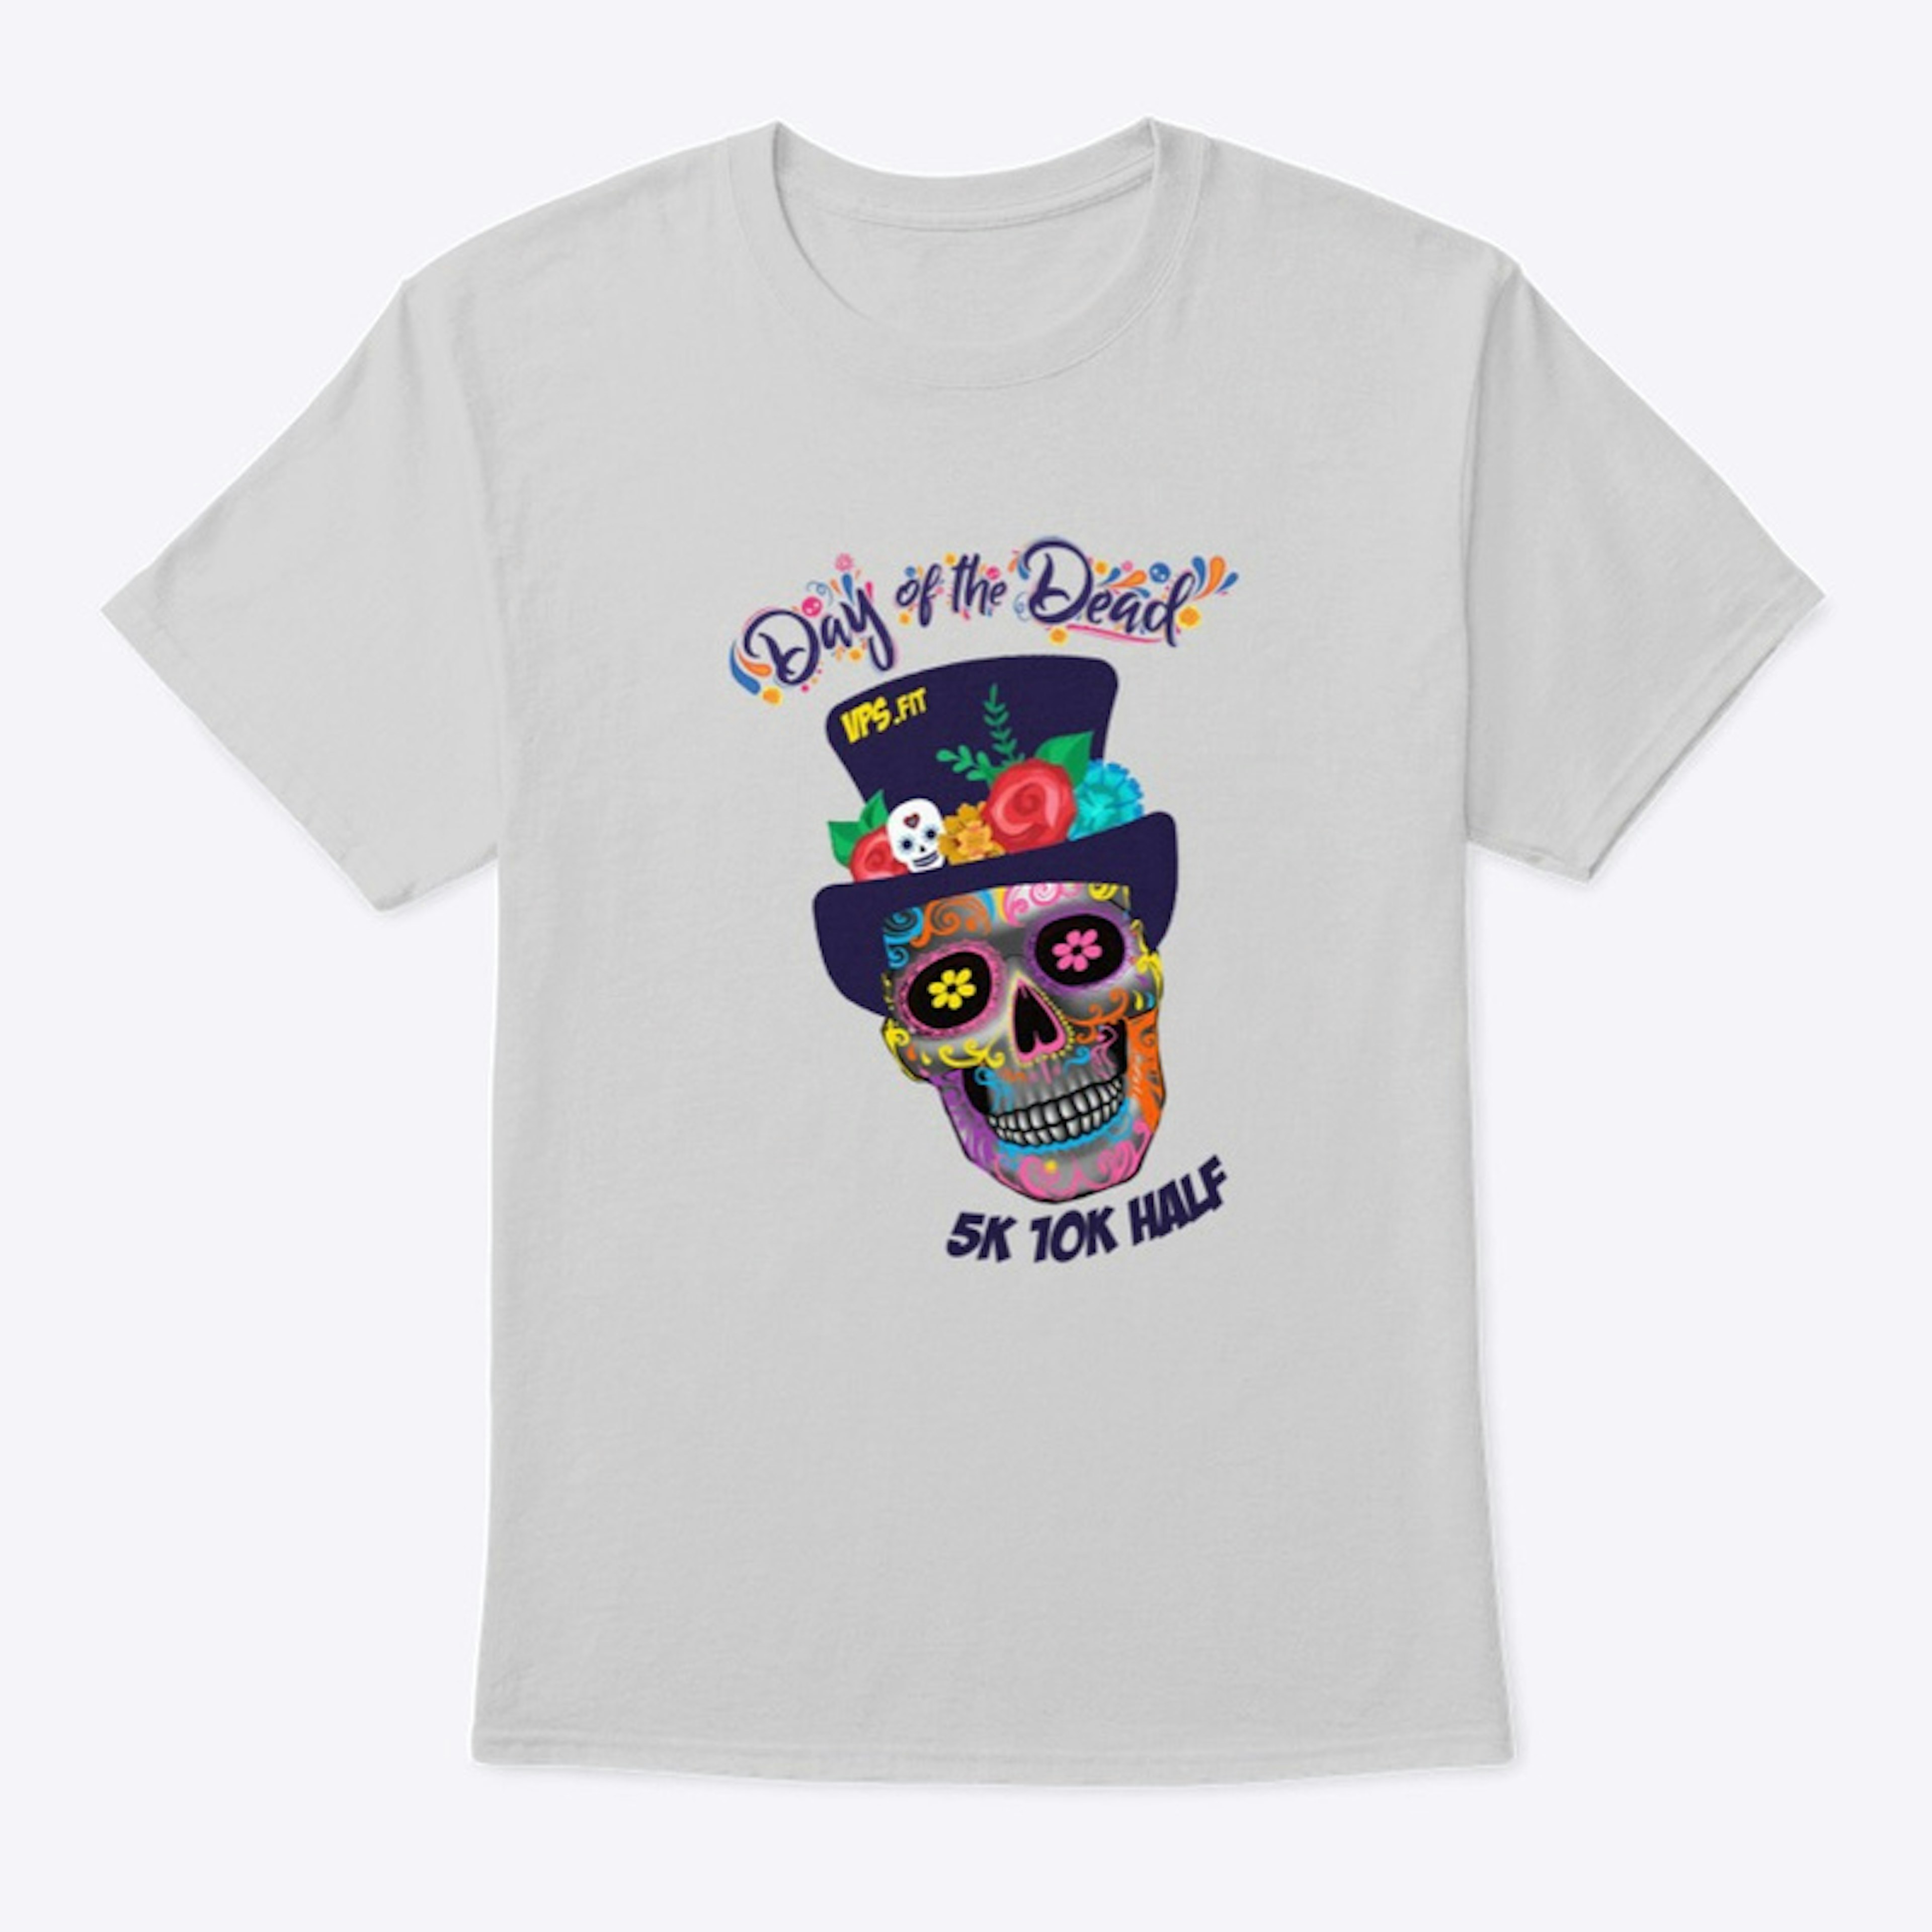 Official Day of the Dead TEE